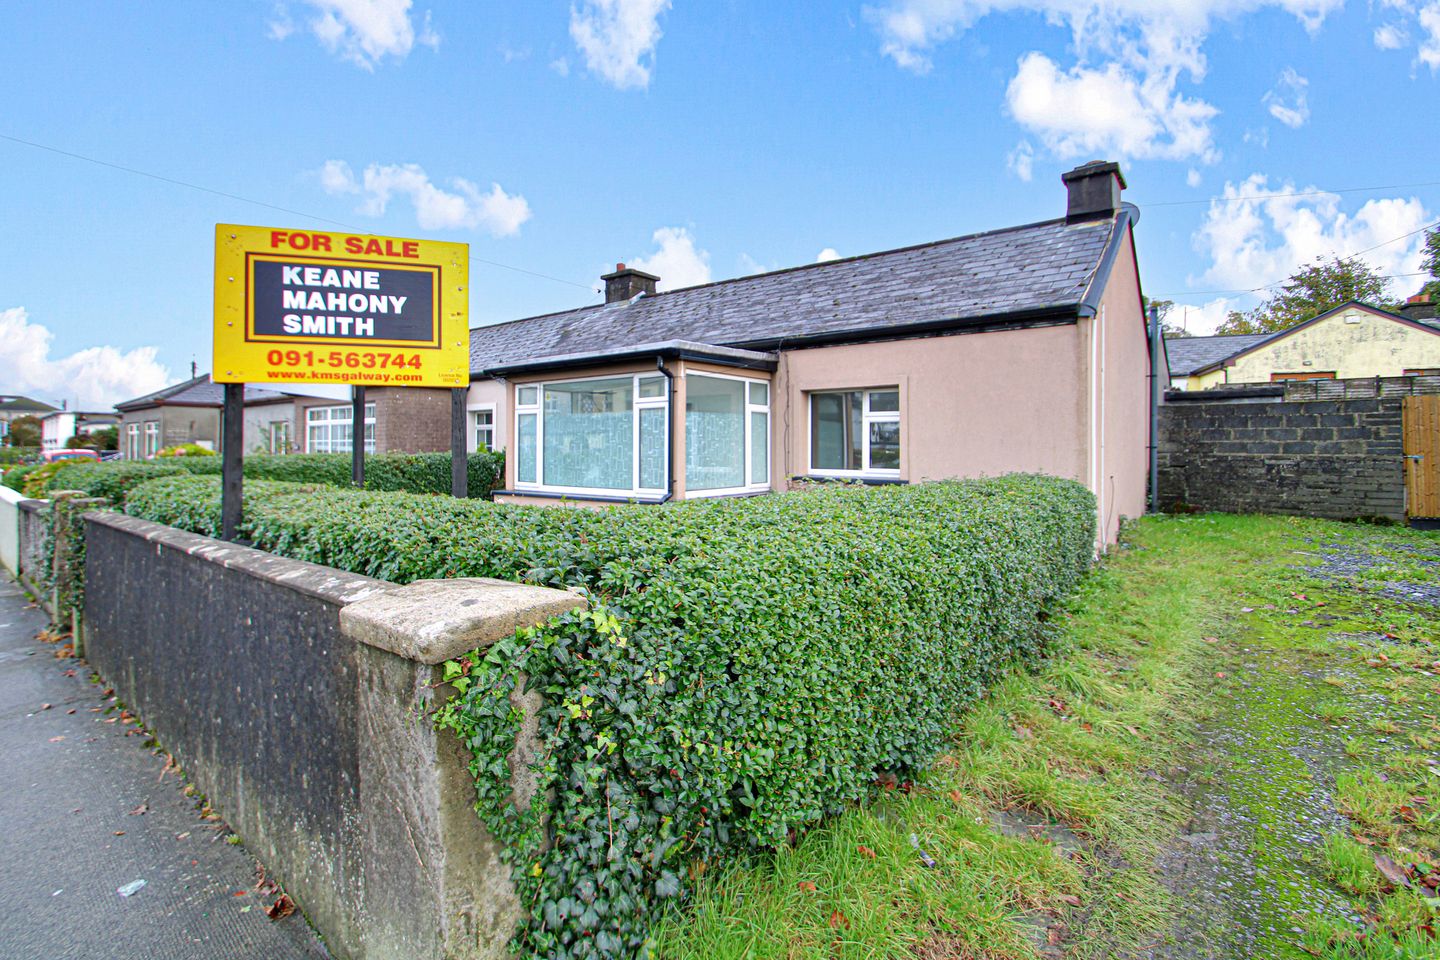 Saint Martin, 85 Father Griffin Road, Galway City, Co. Galway, H91EWX3